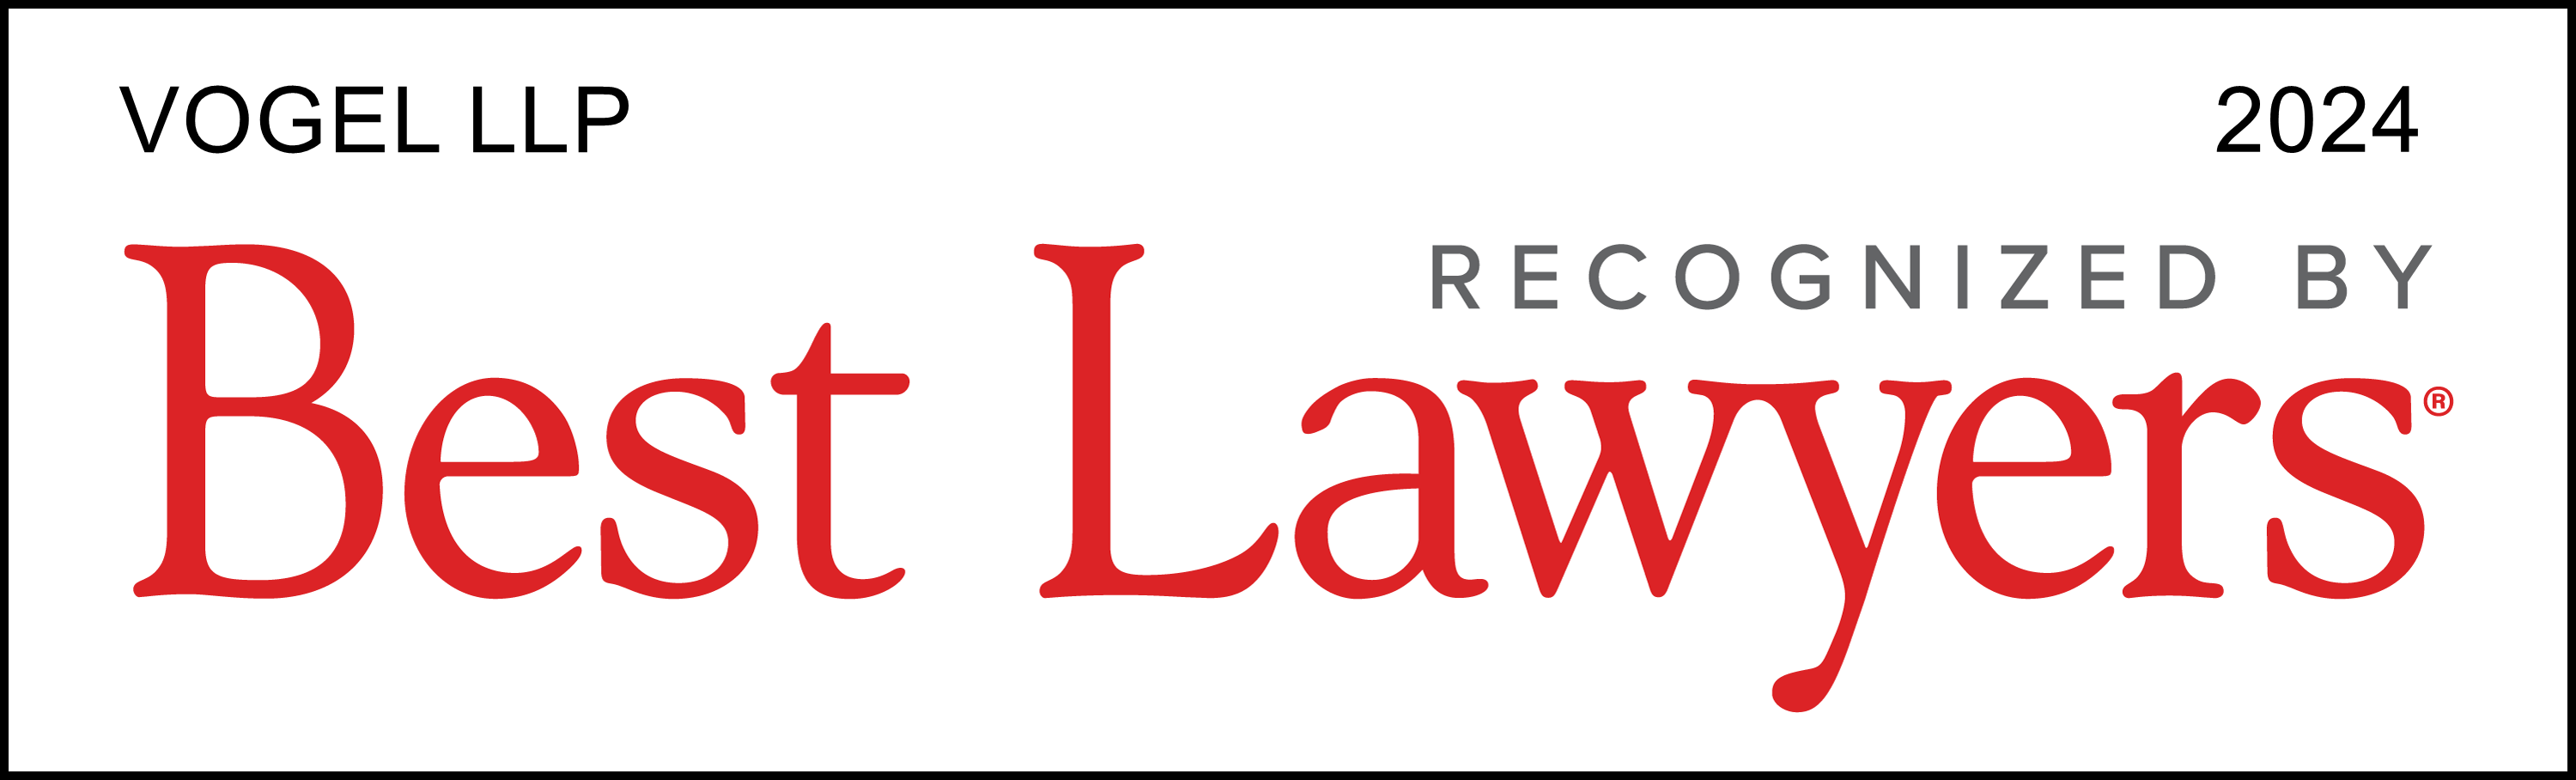 Vogel LLP Recognized by Best Lawyers